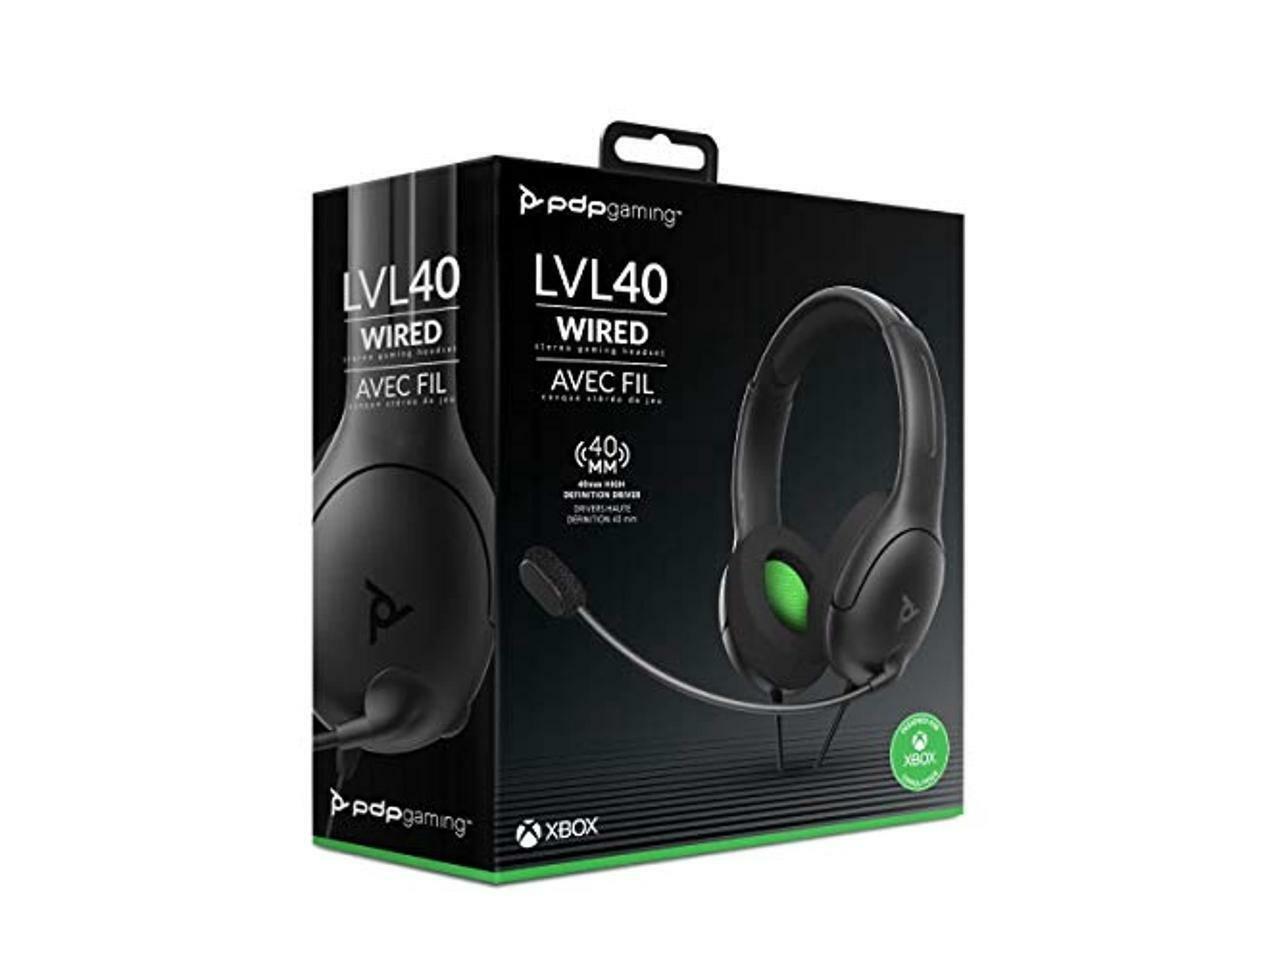 PDP LVL40 Wired Stereo Gaming Headset for Xbox One - Black GB